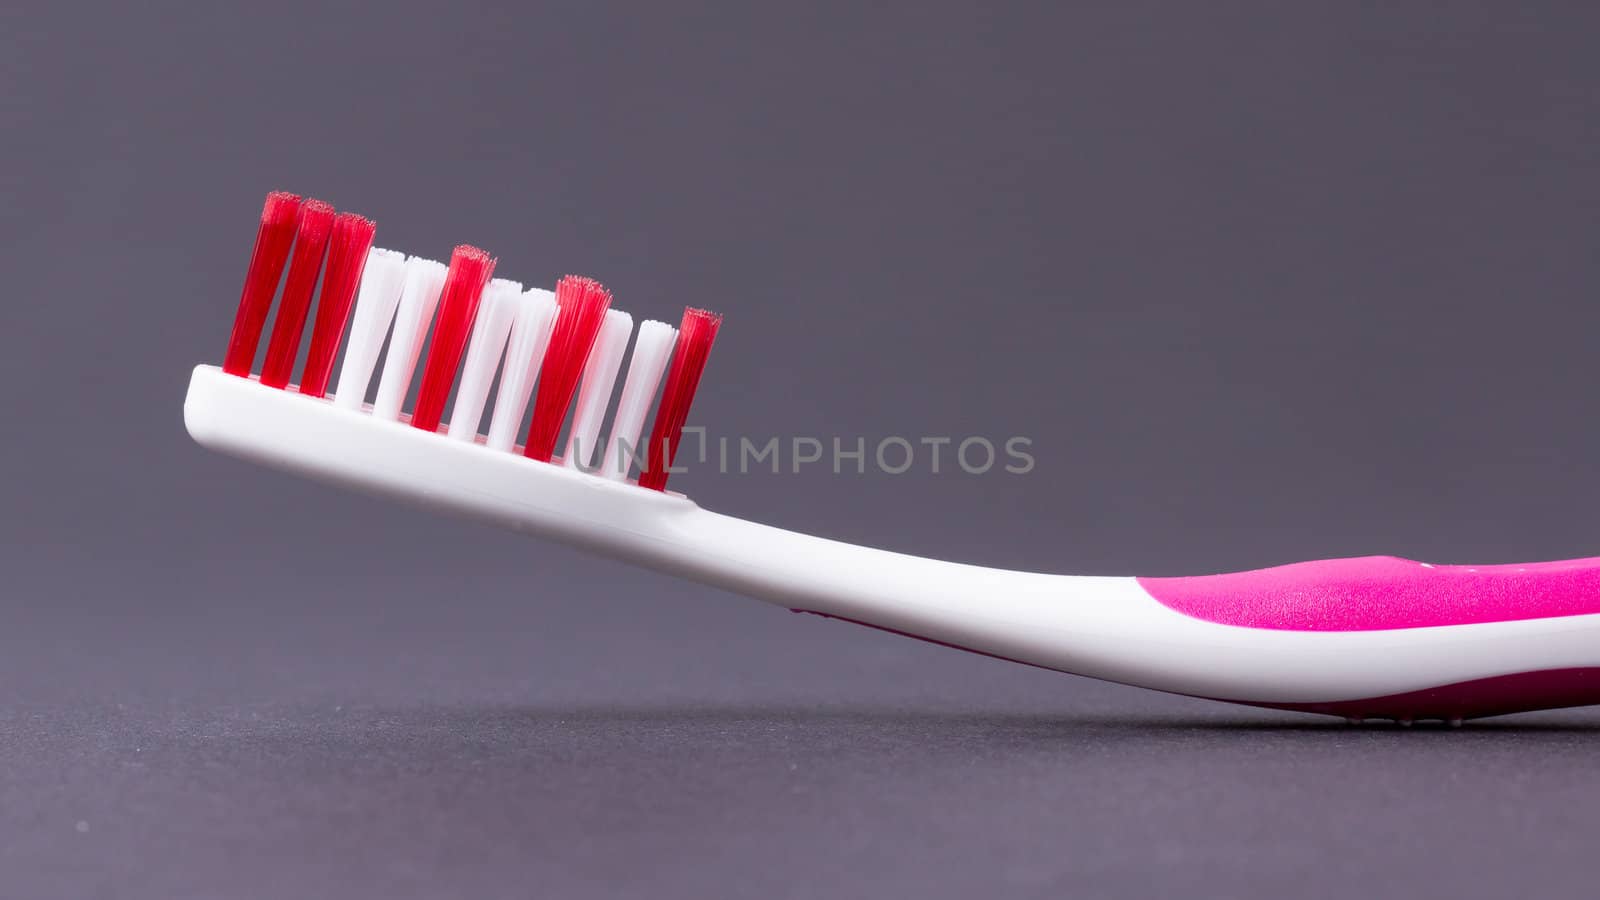 A pink toothbrush by michaklootwijk